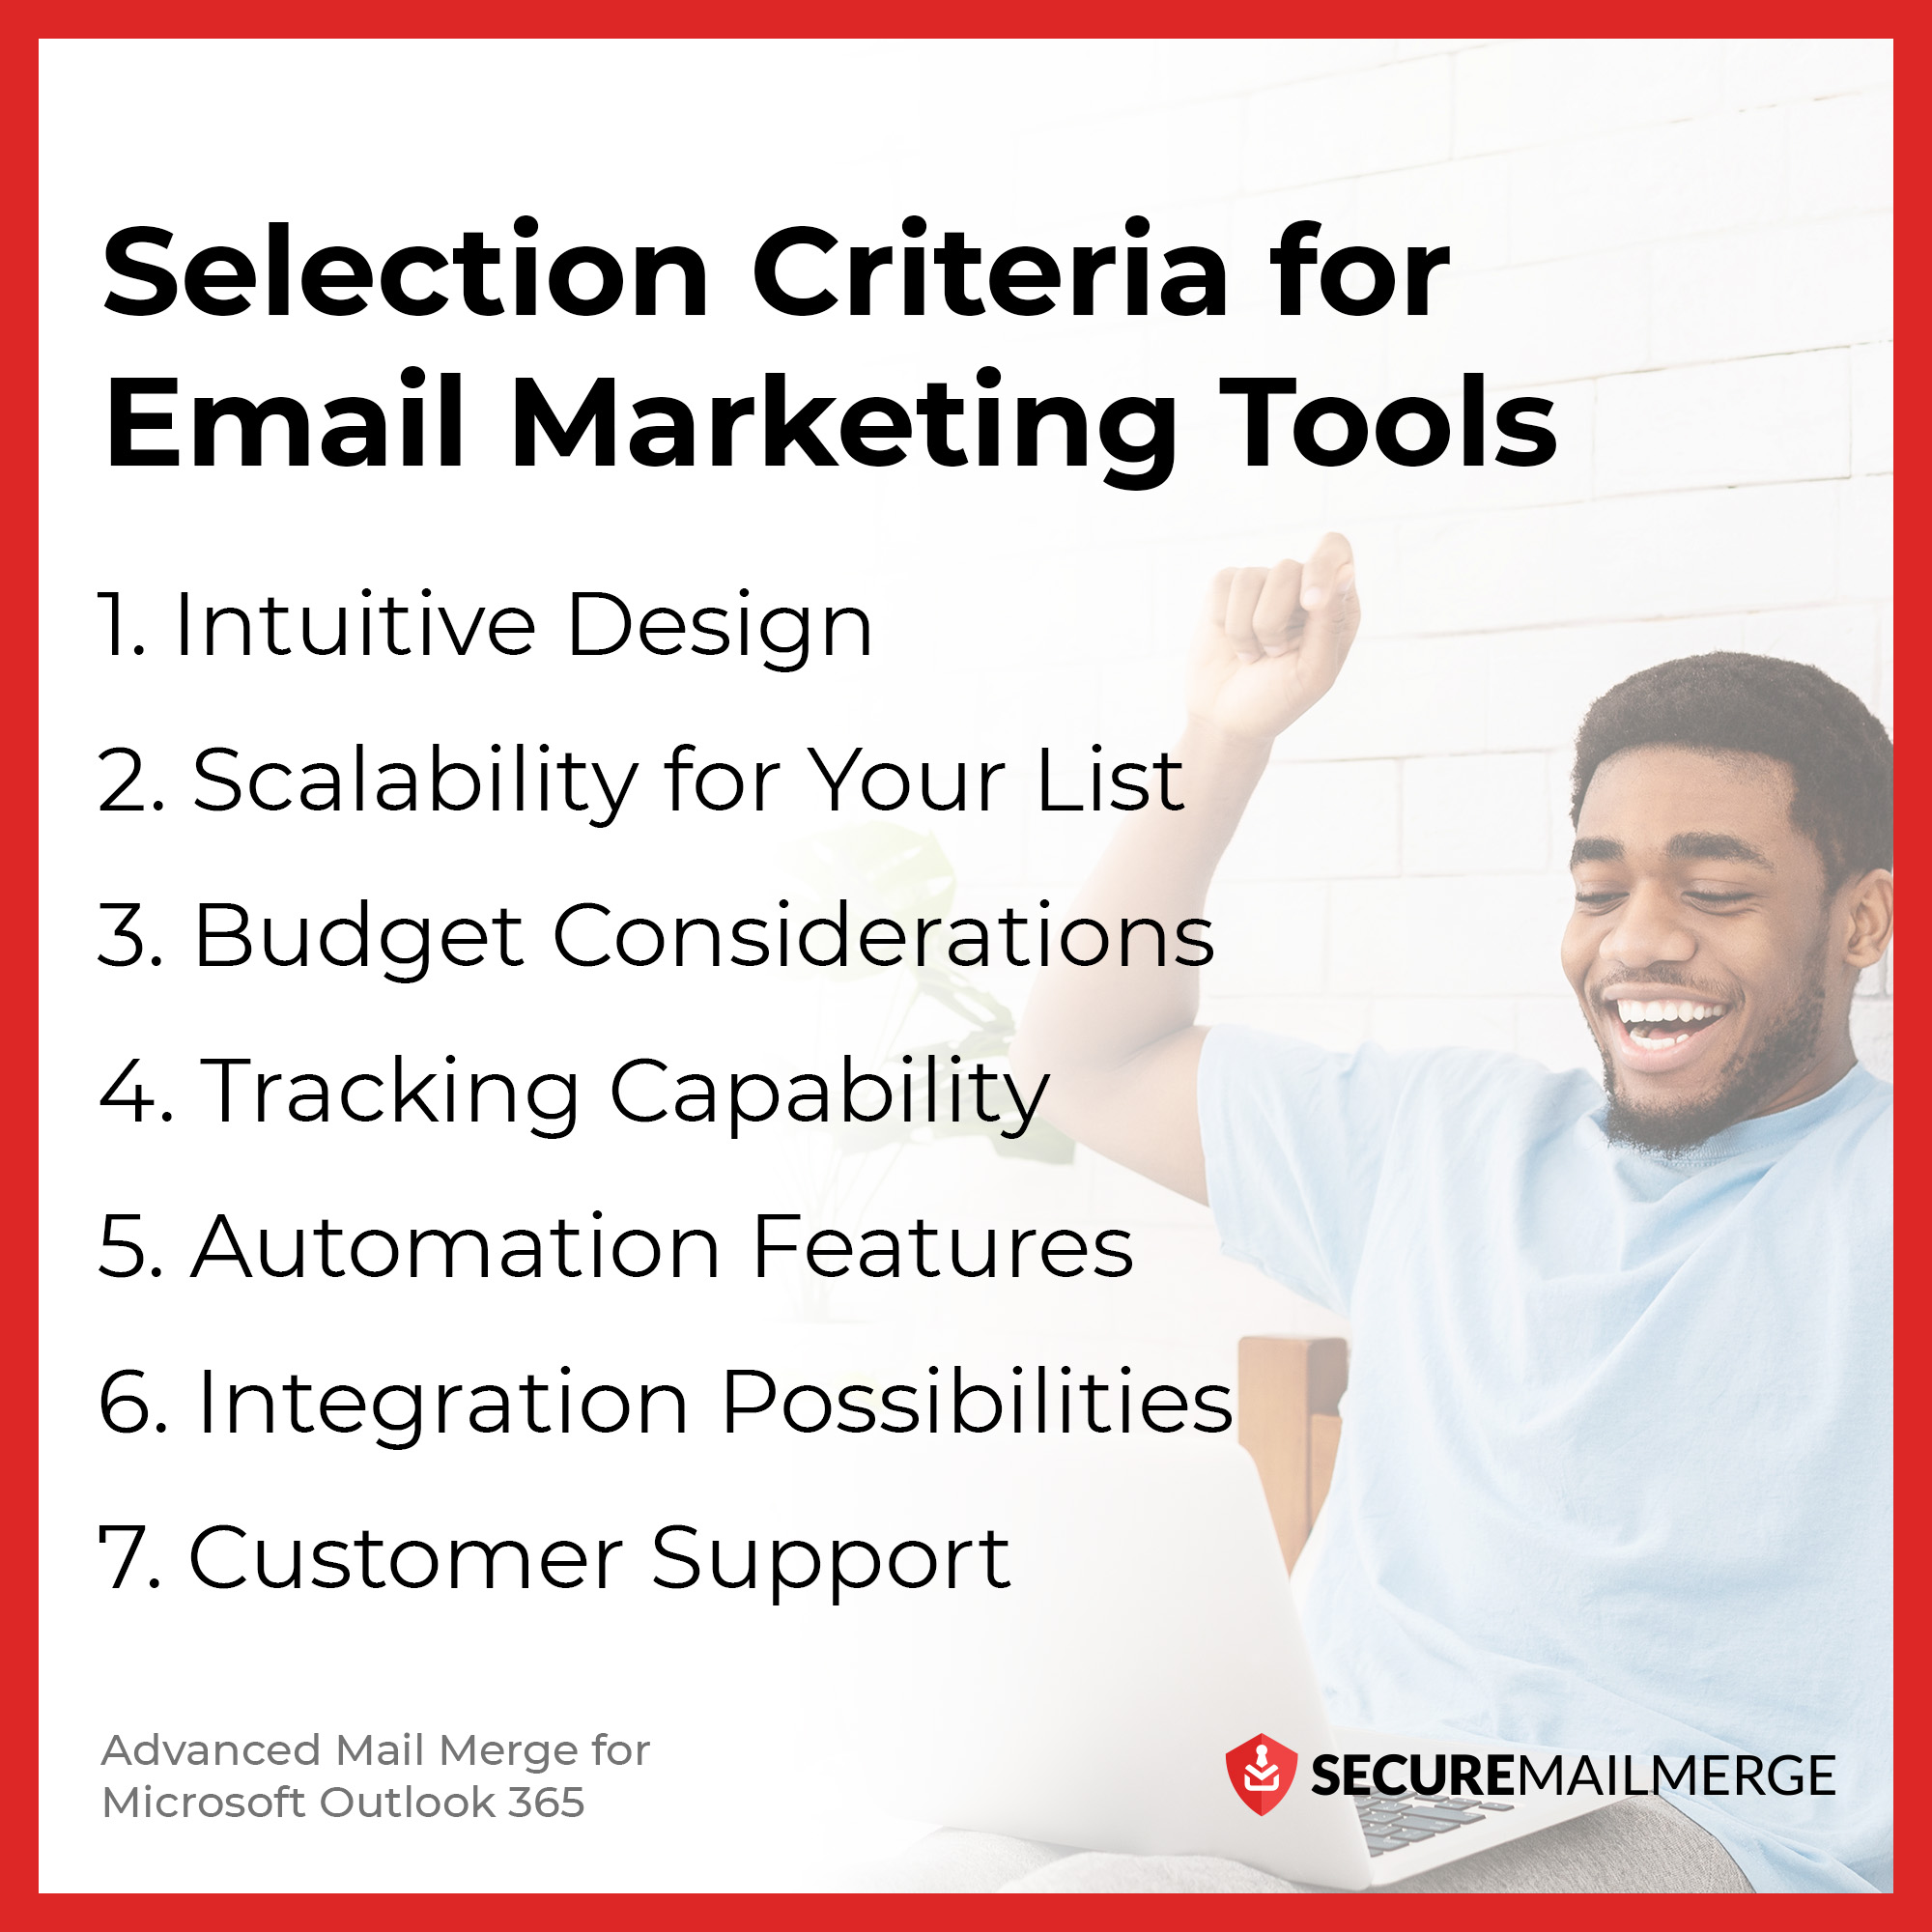 Criteria for Selecting Email Marketing Tools for SaaS